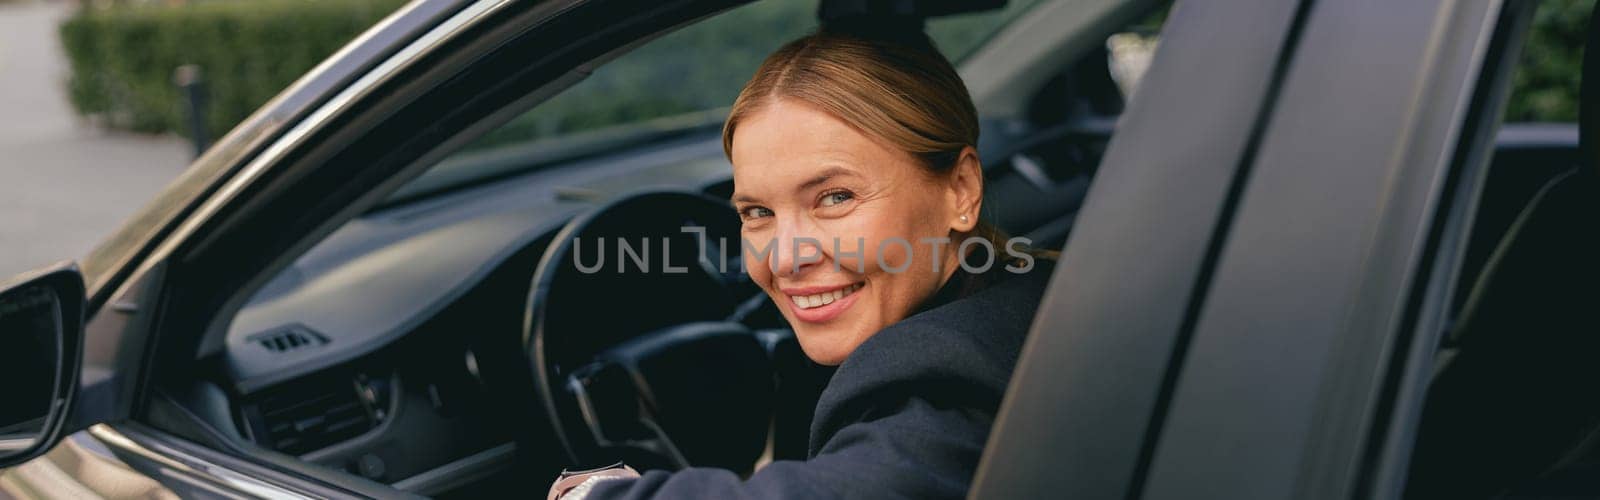 Smiling businesswoman in suit is riding behind steering wheel of car and looks camera by Yaroslav_astakhov